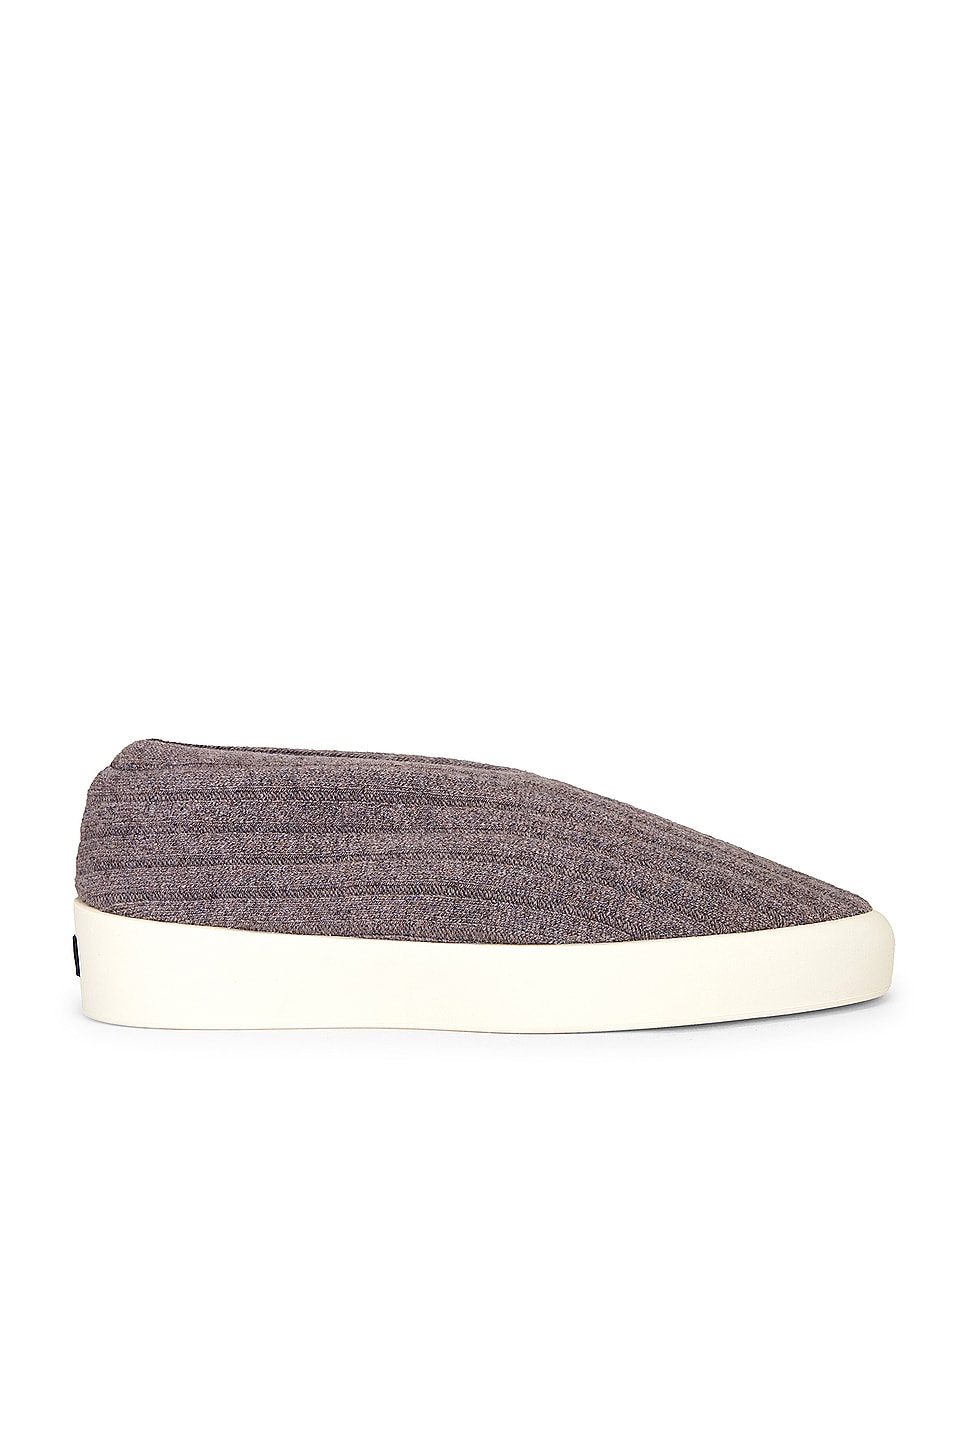 Image 1 of Fear of God Moc Knit Low in Taupe